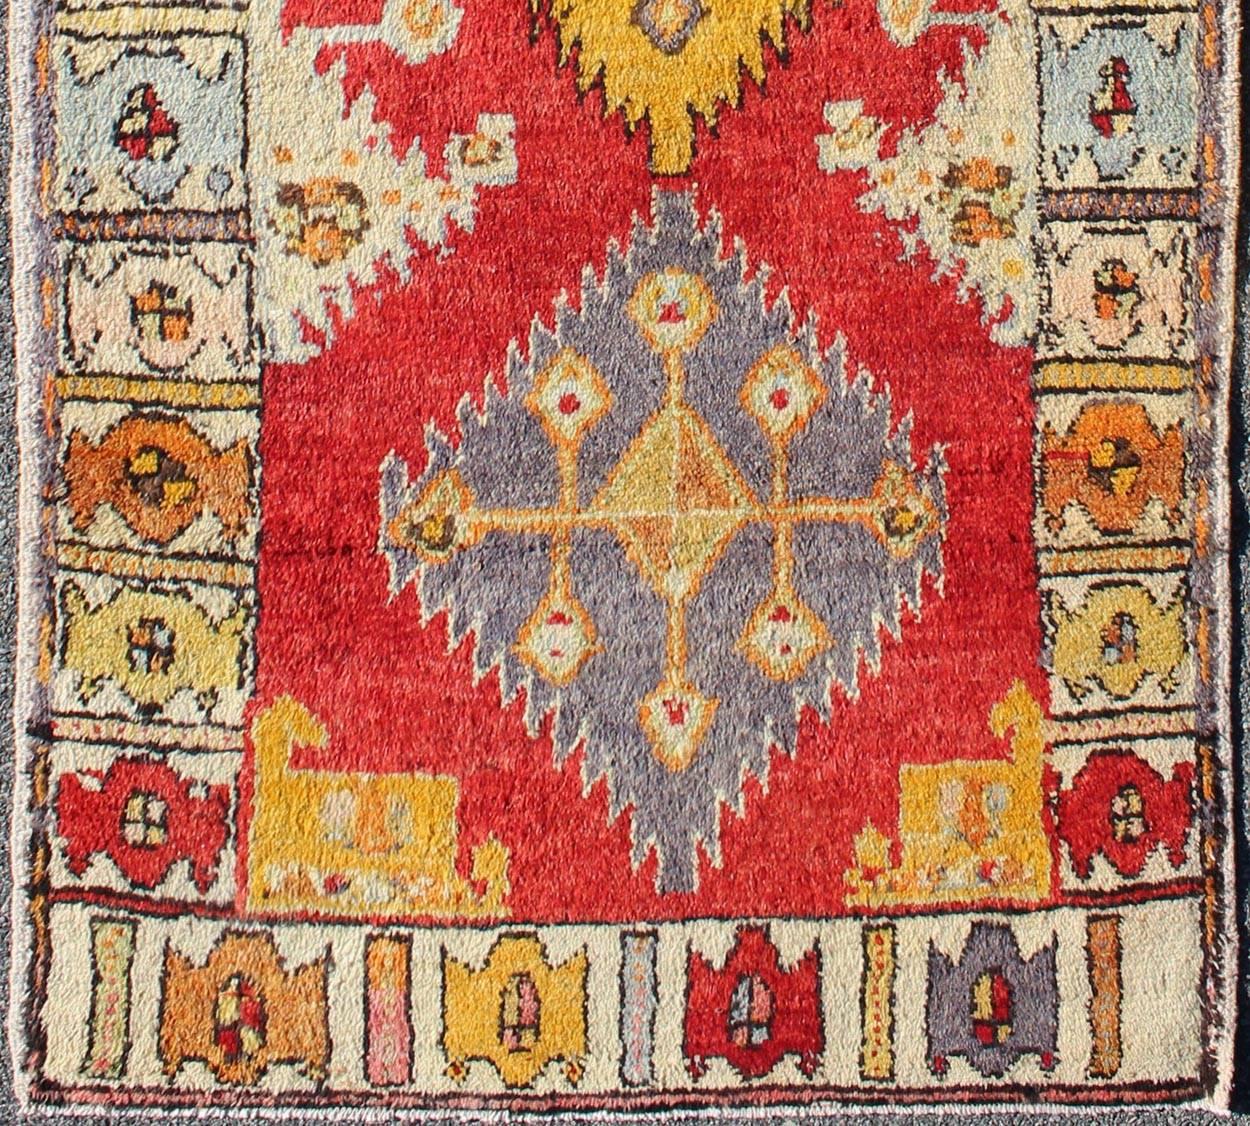 Tribal Turkish Oushak Runner with bright colors in Red, Gold, Yellow and Orange.
This cheerful Oushak runner contains a unique blend of colors along with geometric design. The multi-layered diamond medallions are complemented by asymmetrical and